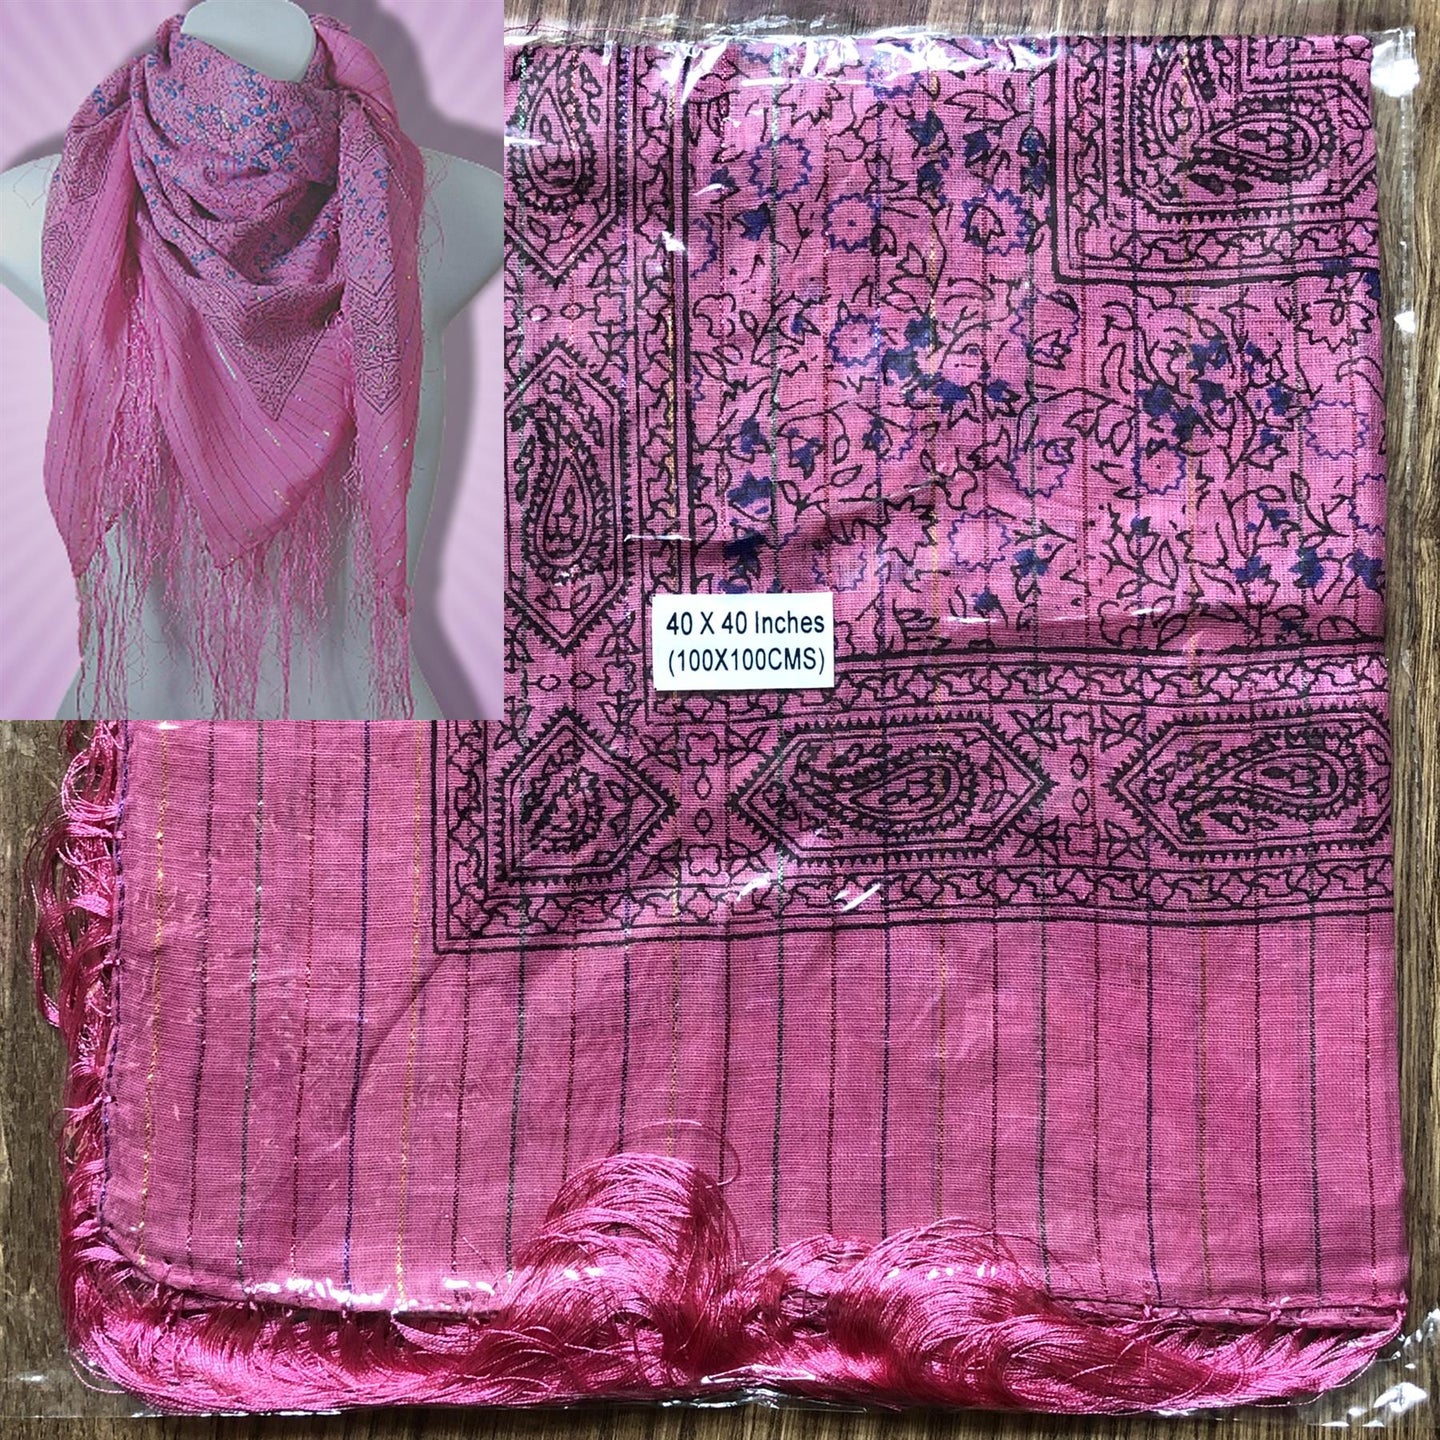 Cotton Dollar Print Scarf Shawl with Lurex and Fringe – Pink